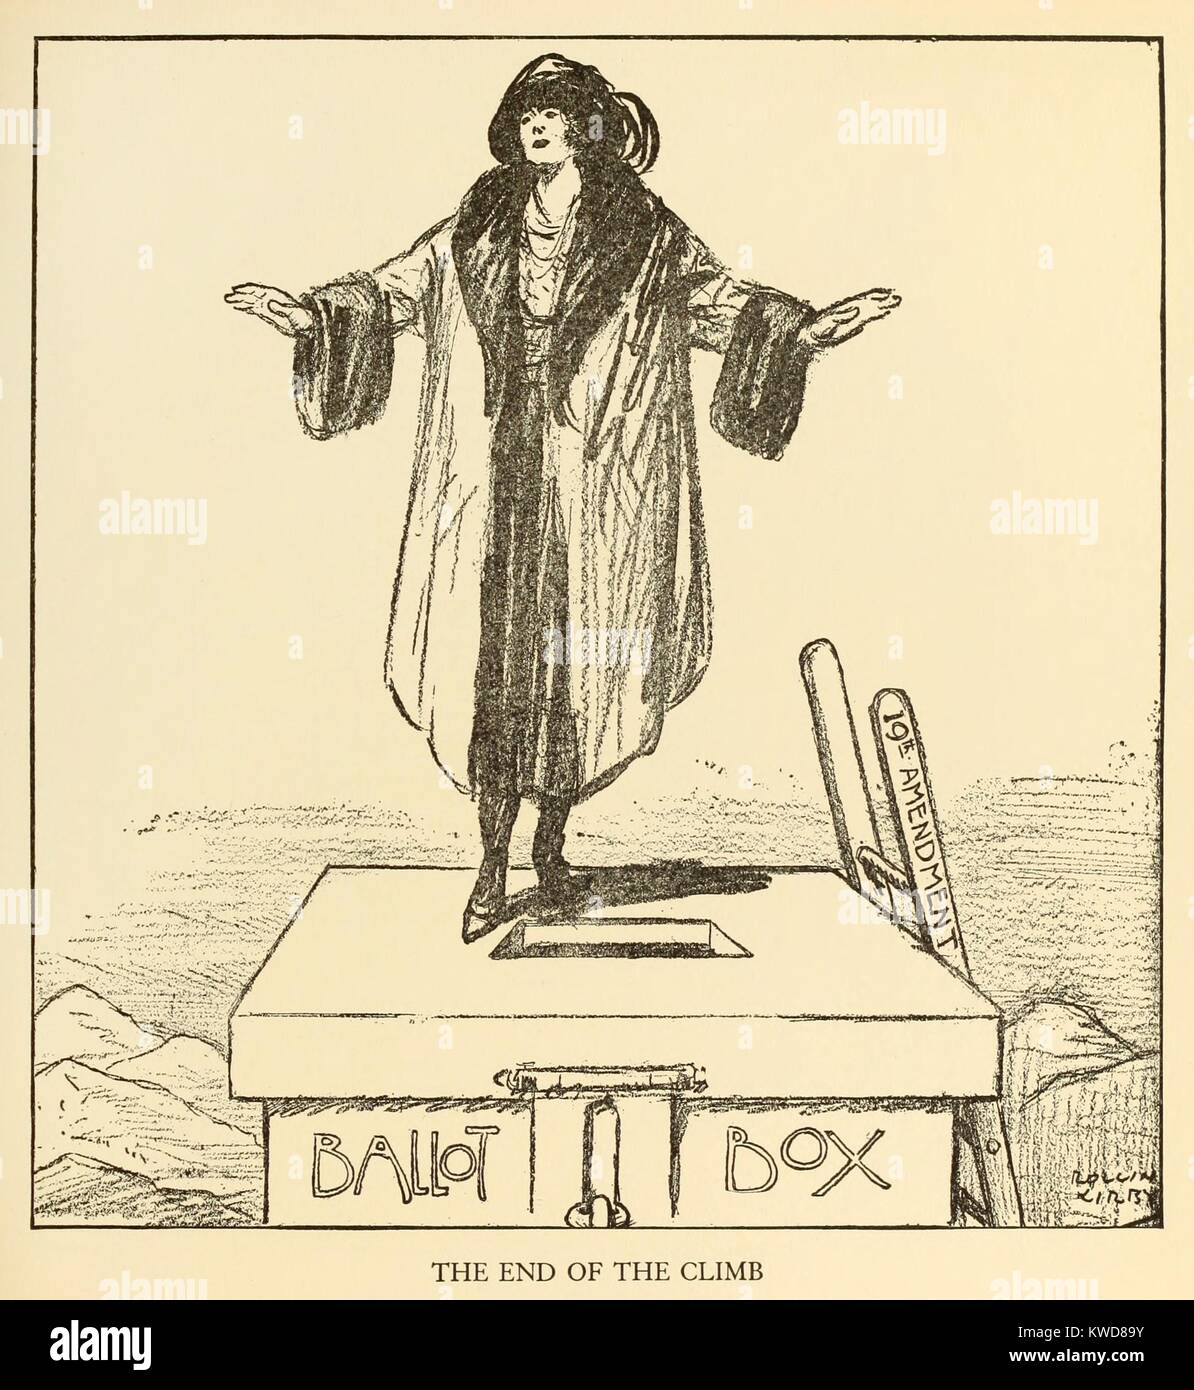 END OF THE CLIMB. Political cartoon celebrating women's suffrage. A woman stands on a giant ballot which she reached it by climbing a ladder labeled '19th Amendment'. By New York World cartoonist, Kirby Rollin, 1920. (BSLOC 2015 17 192) Stock Photo